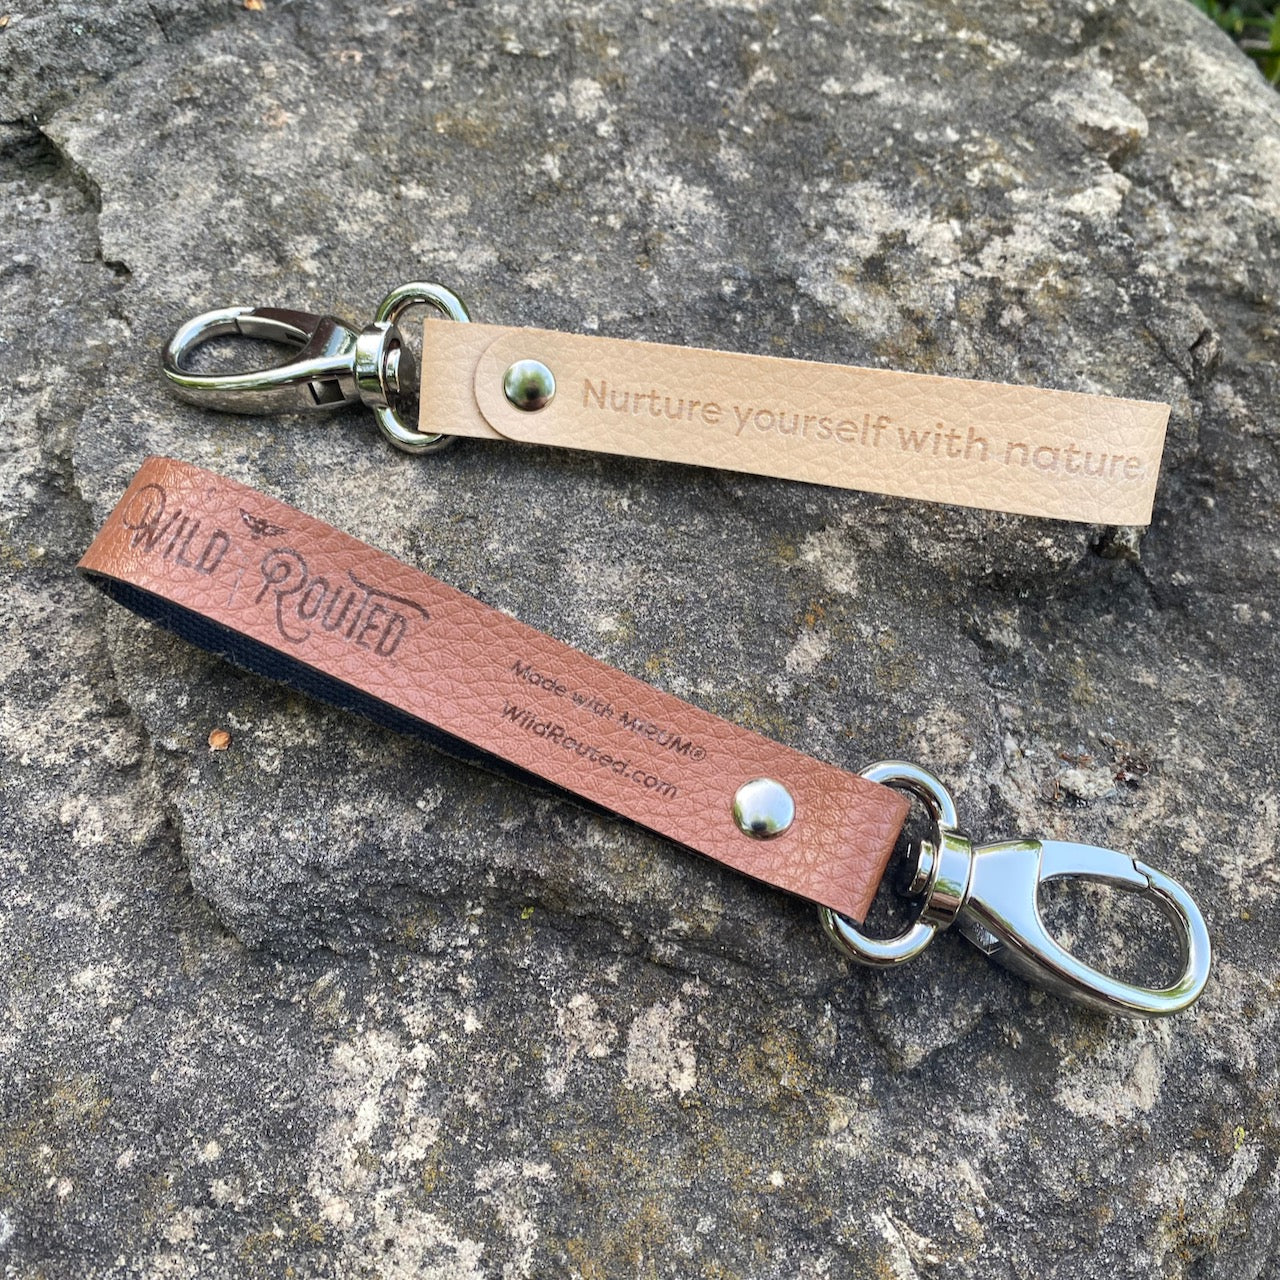 Wild Routed branded nurture yourself with nature mirum keyring strap in tan and brown suede 